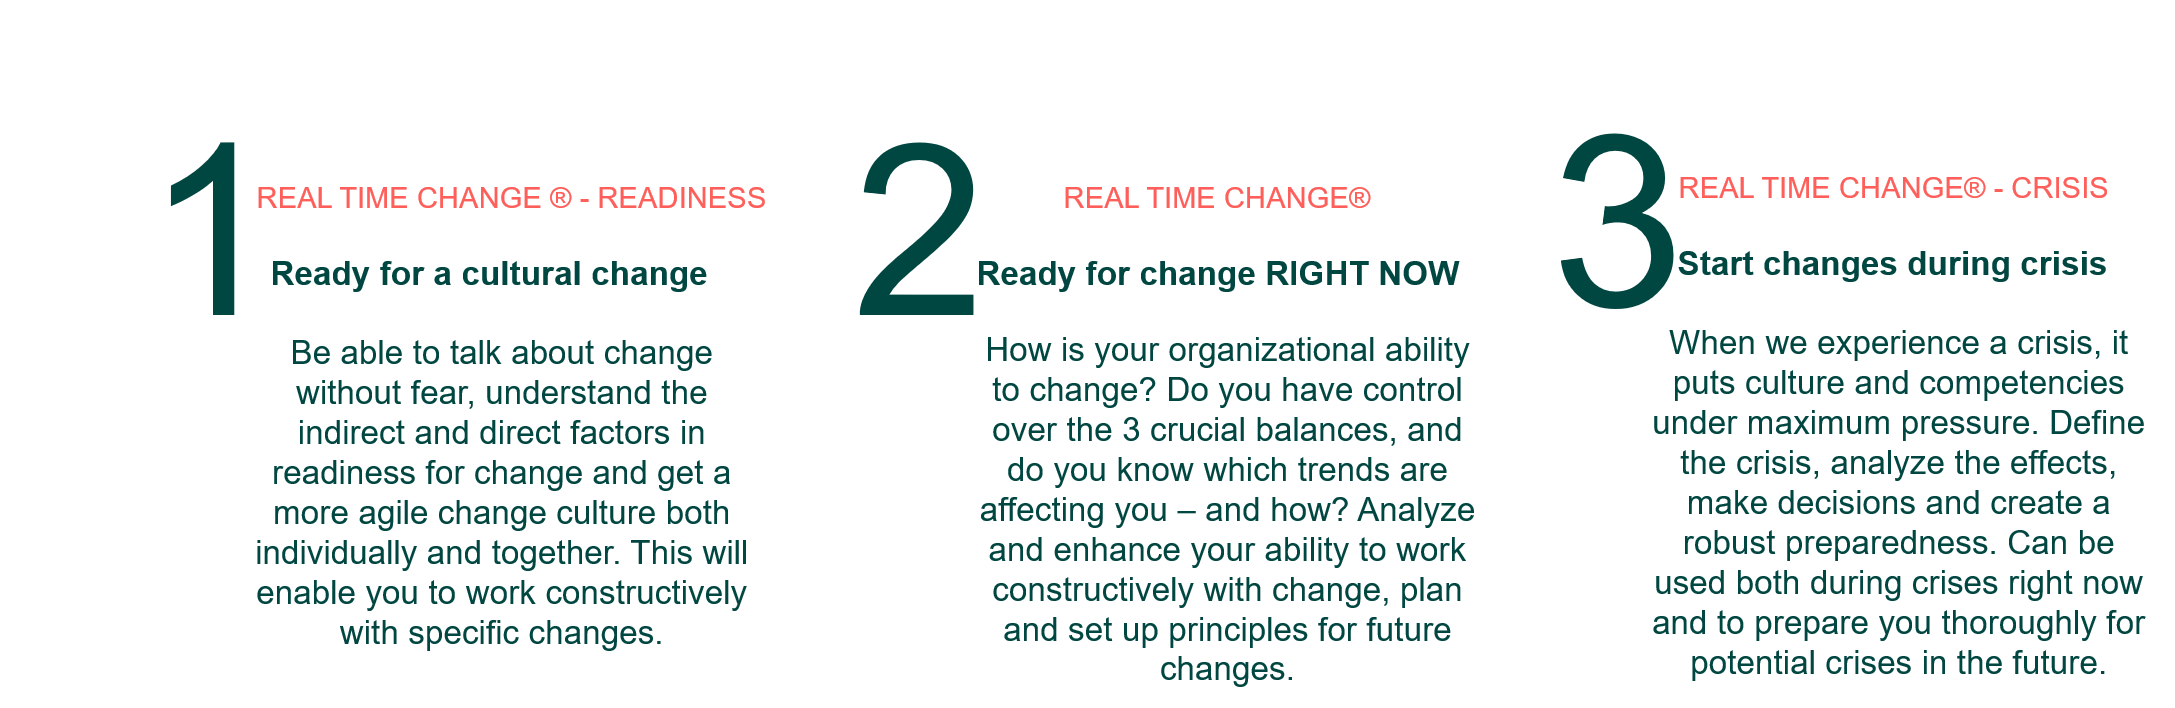 Change management - Model - The three concepts